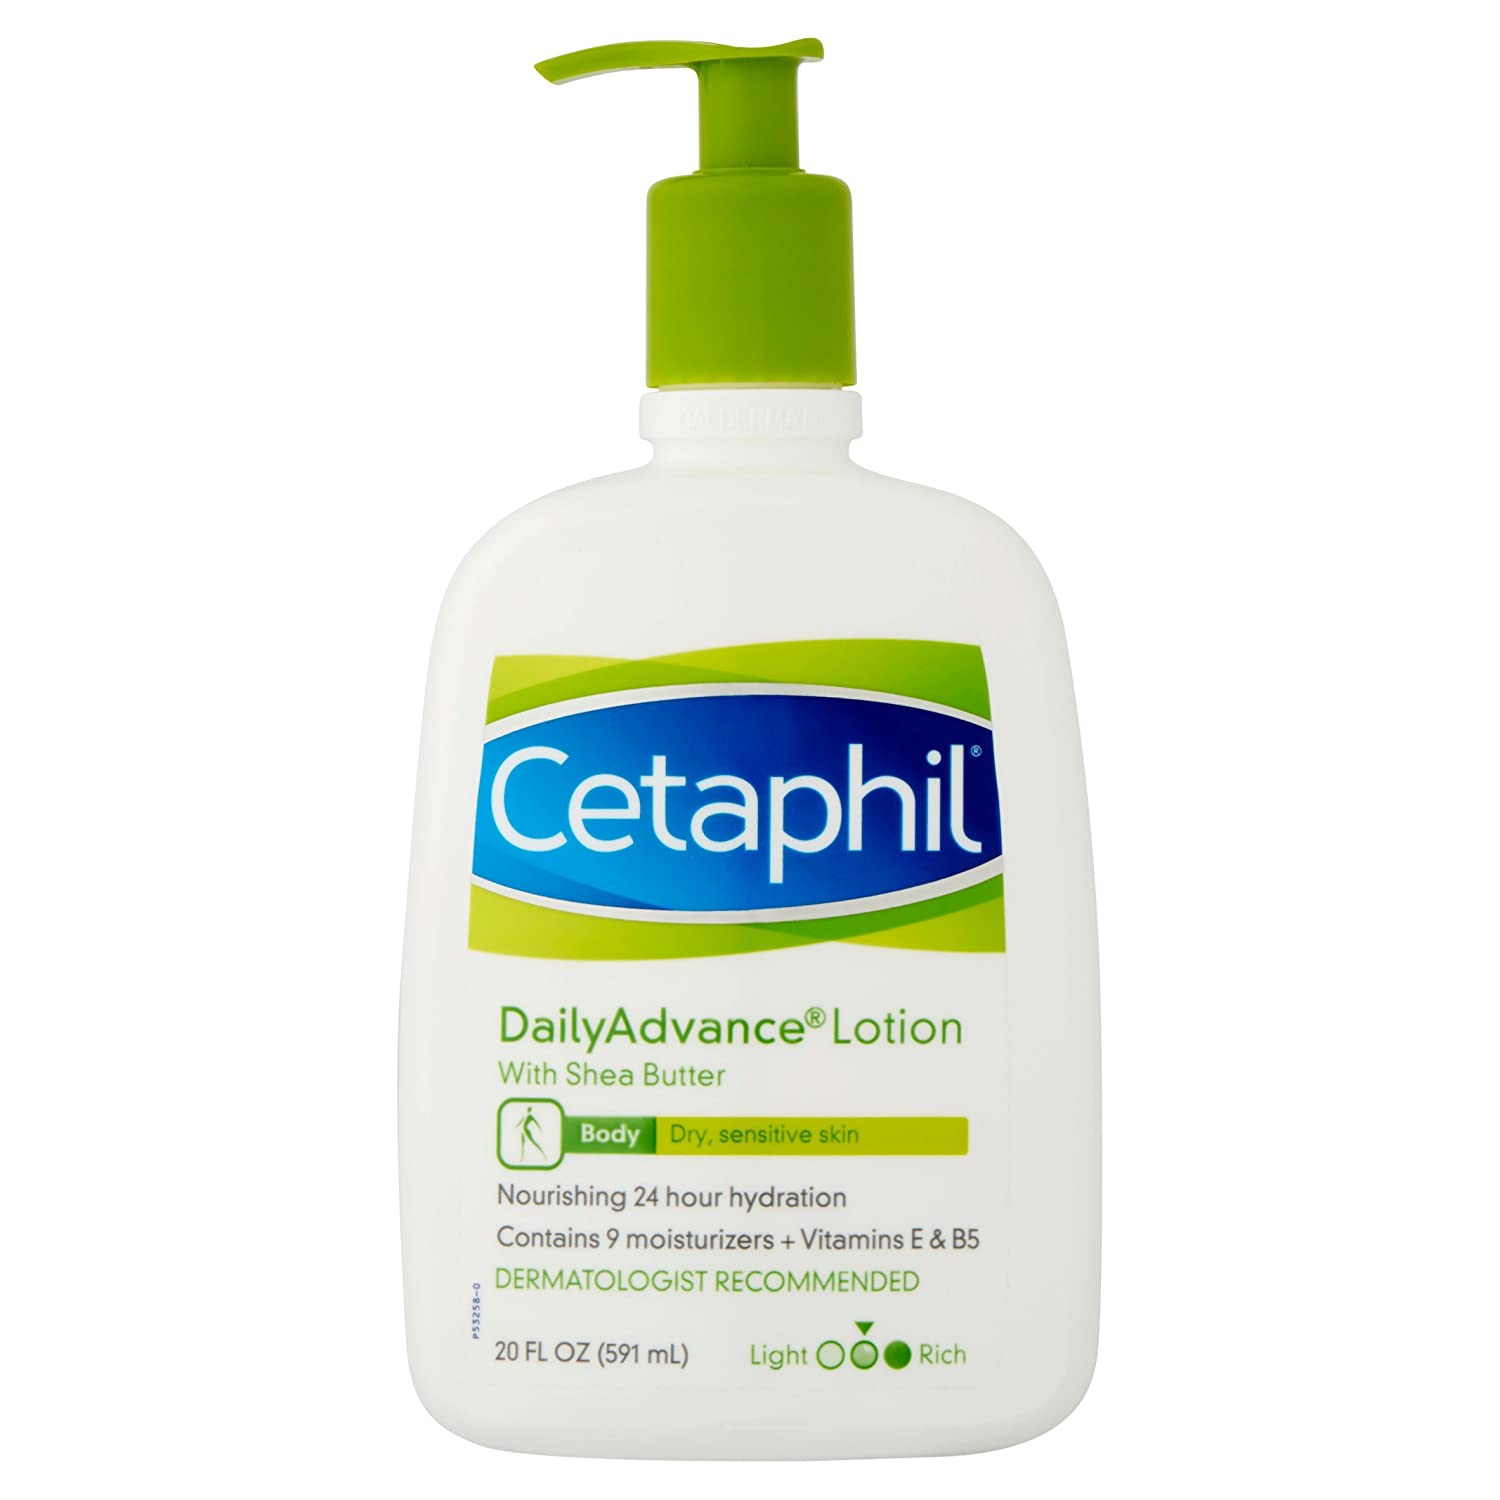 Cetaphil DailyAdvance Lotion with Shea Butter for Body (591 ml) Cetaphil